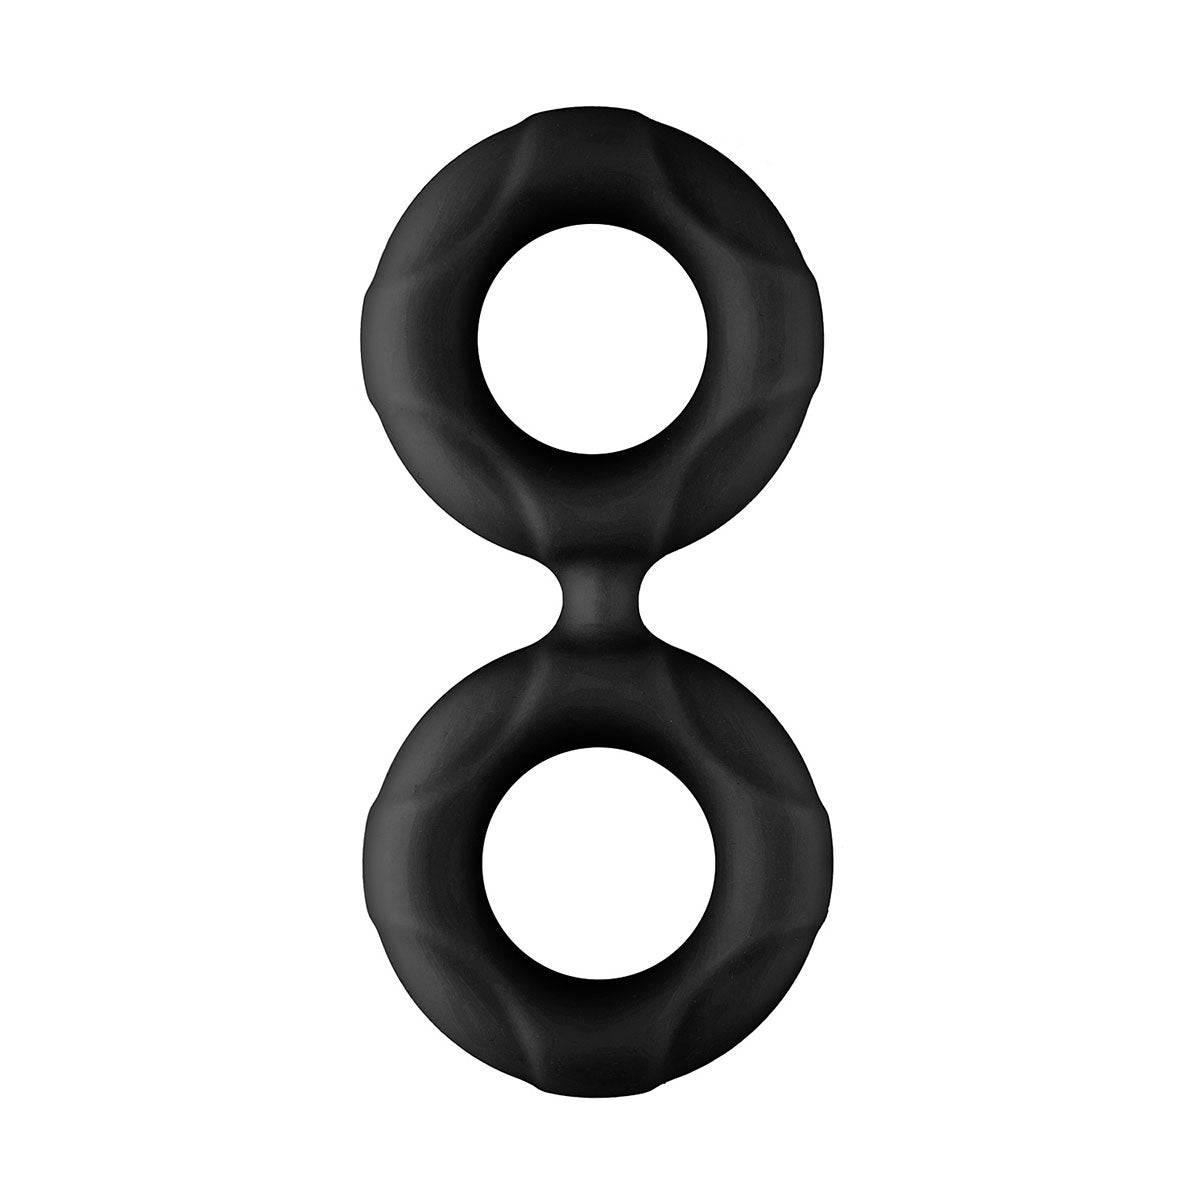 FORTO F-81 44mm Double Ring - Black